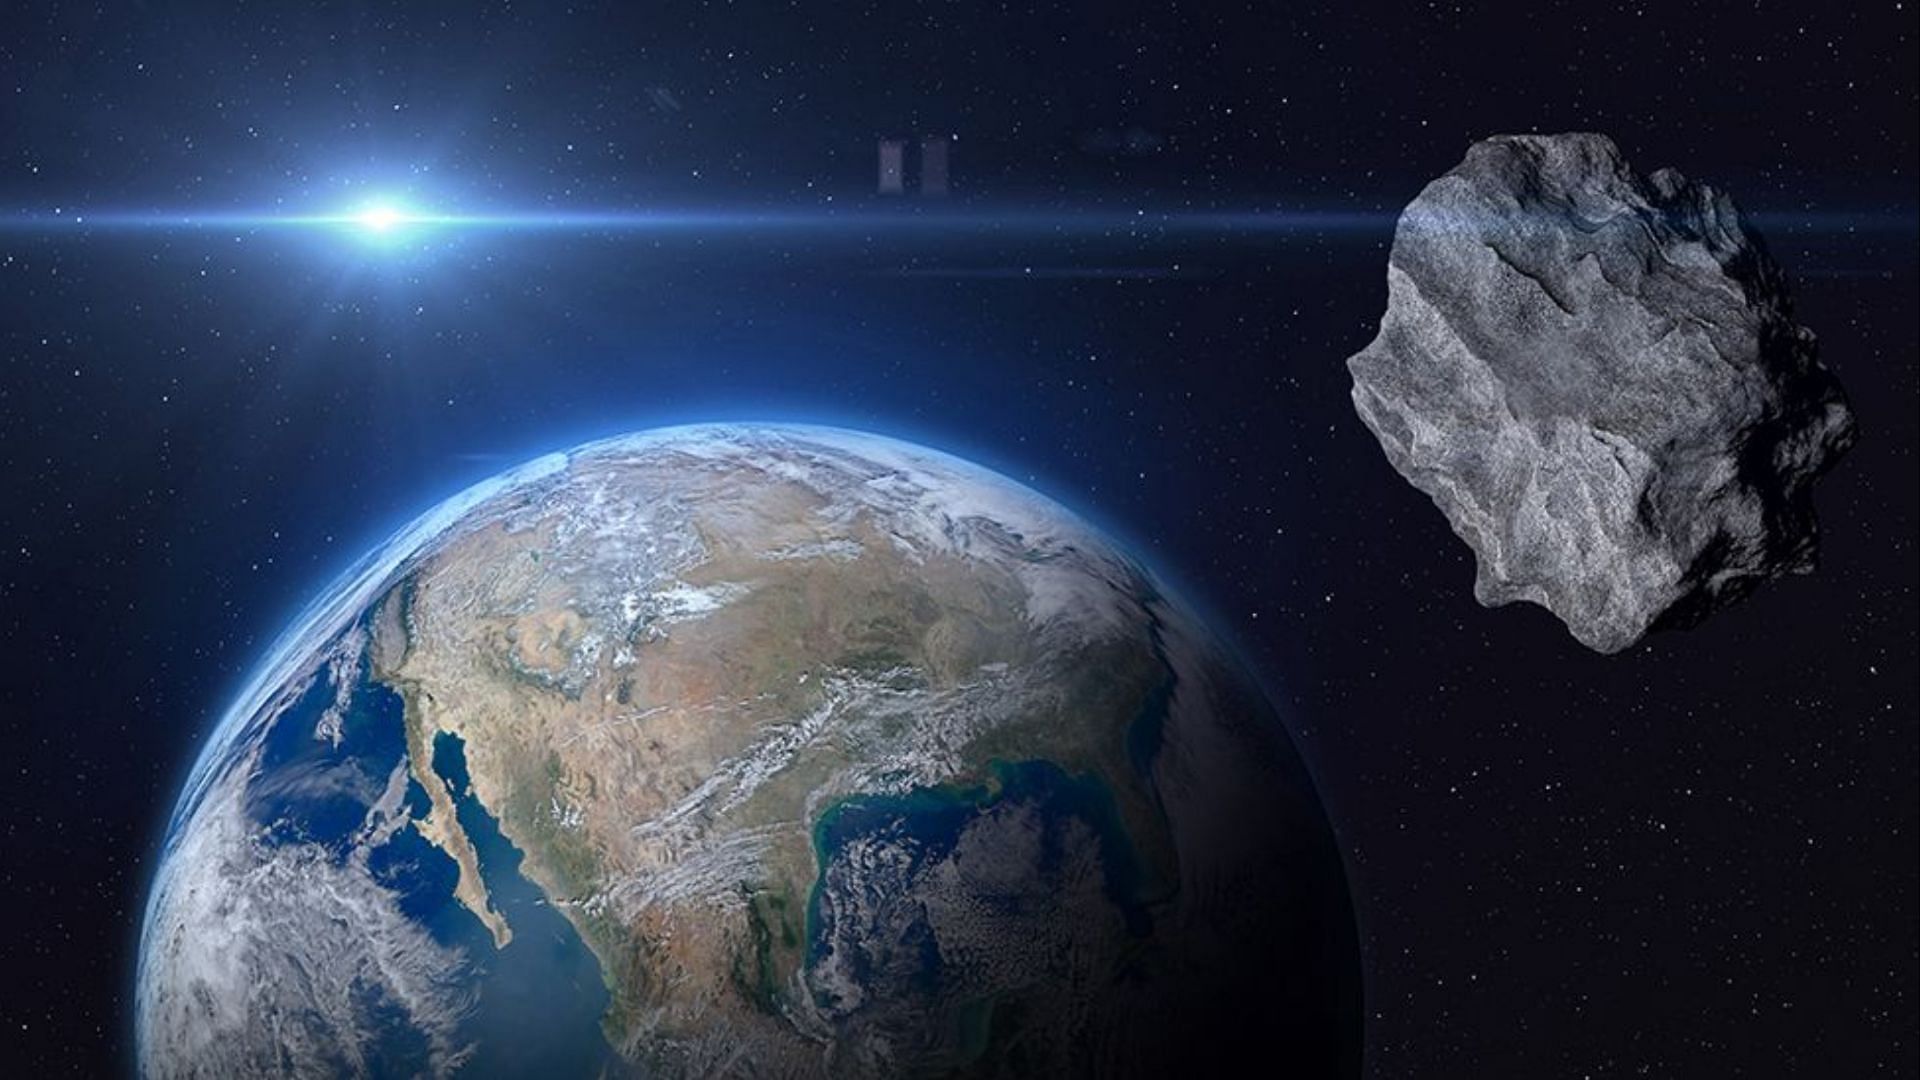 NASA claims a newly discovered asteroid named 2023 DZ2 will pass by our planet this weekend. (Image via Shutterstock)